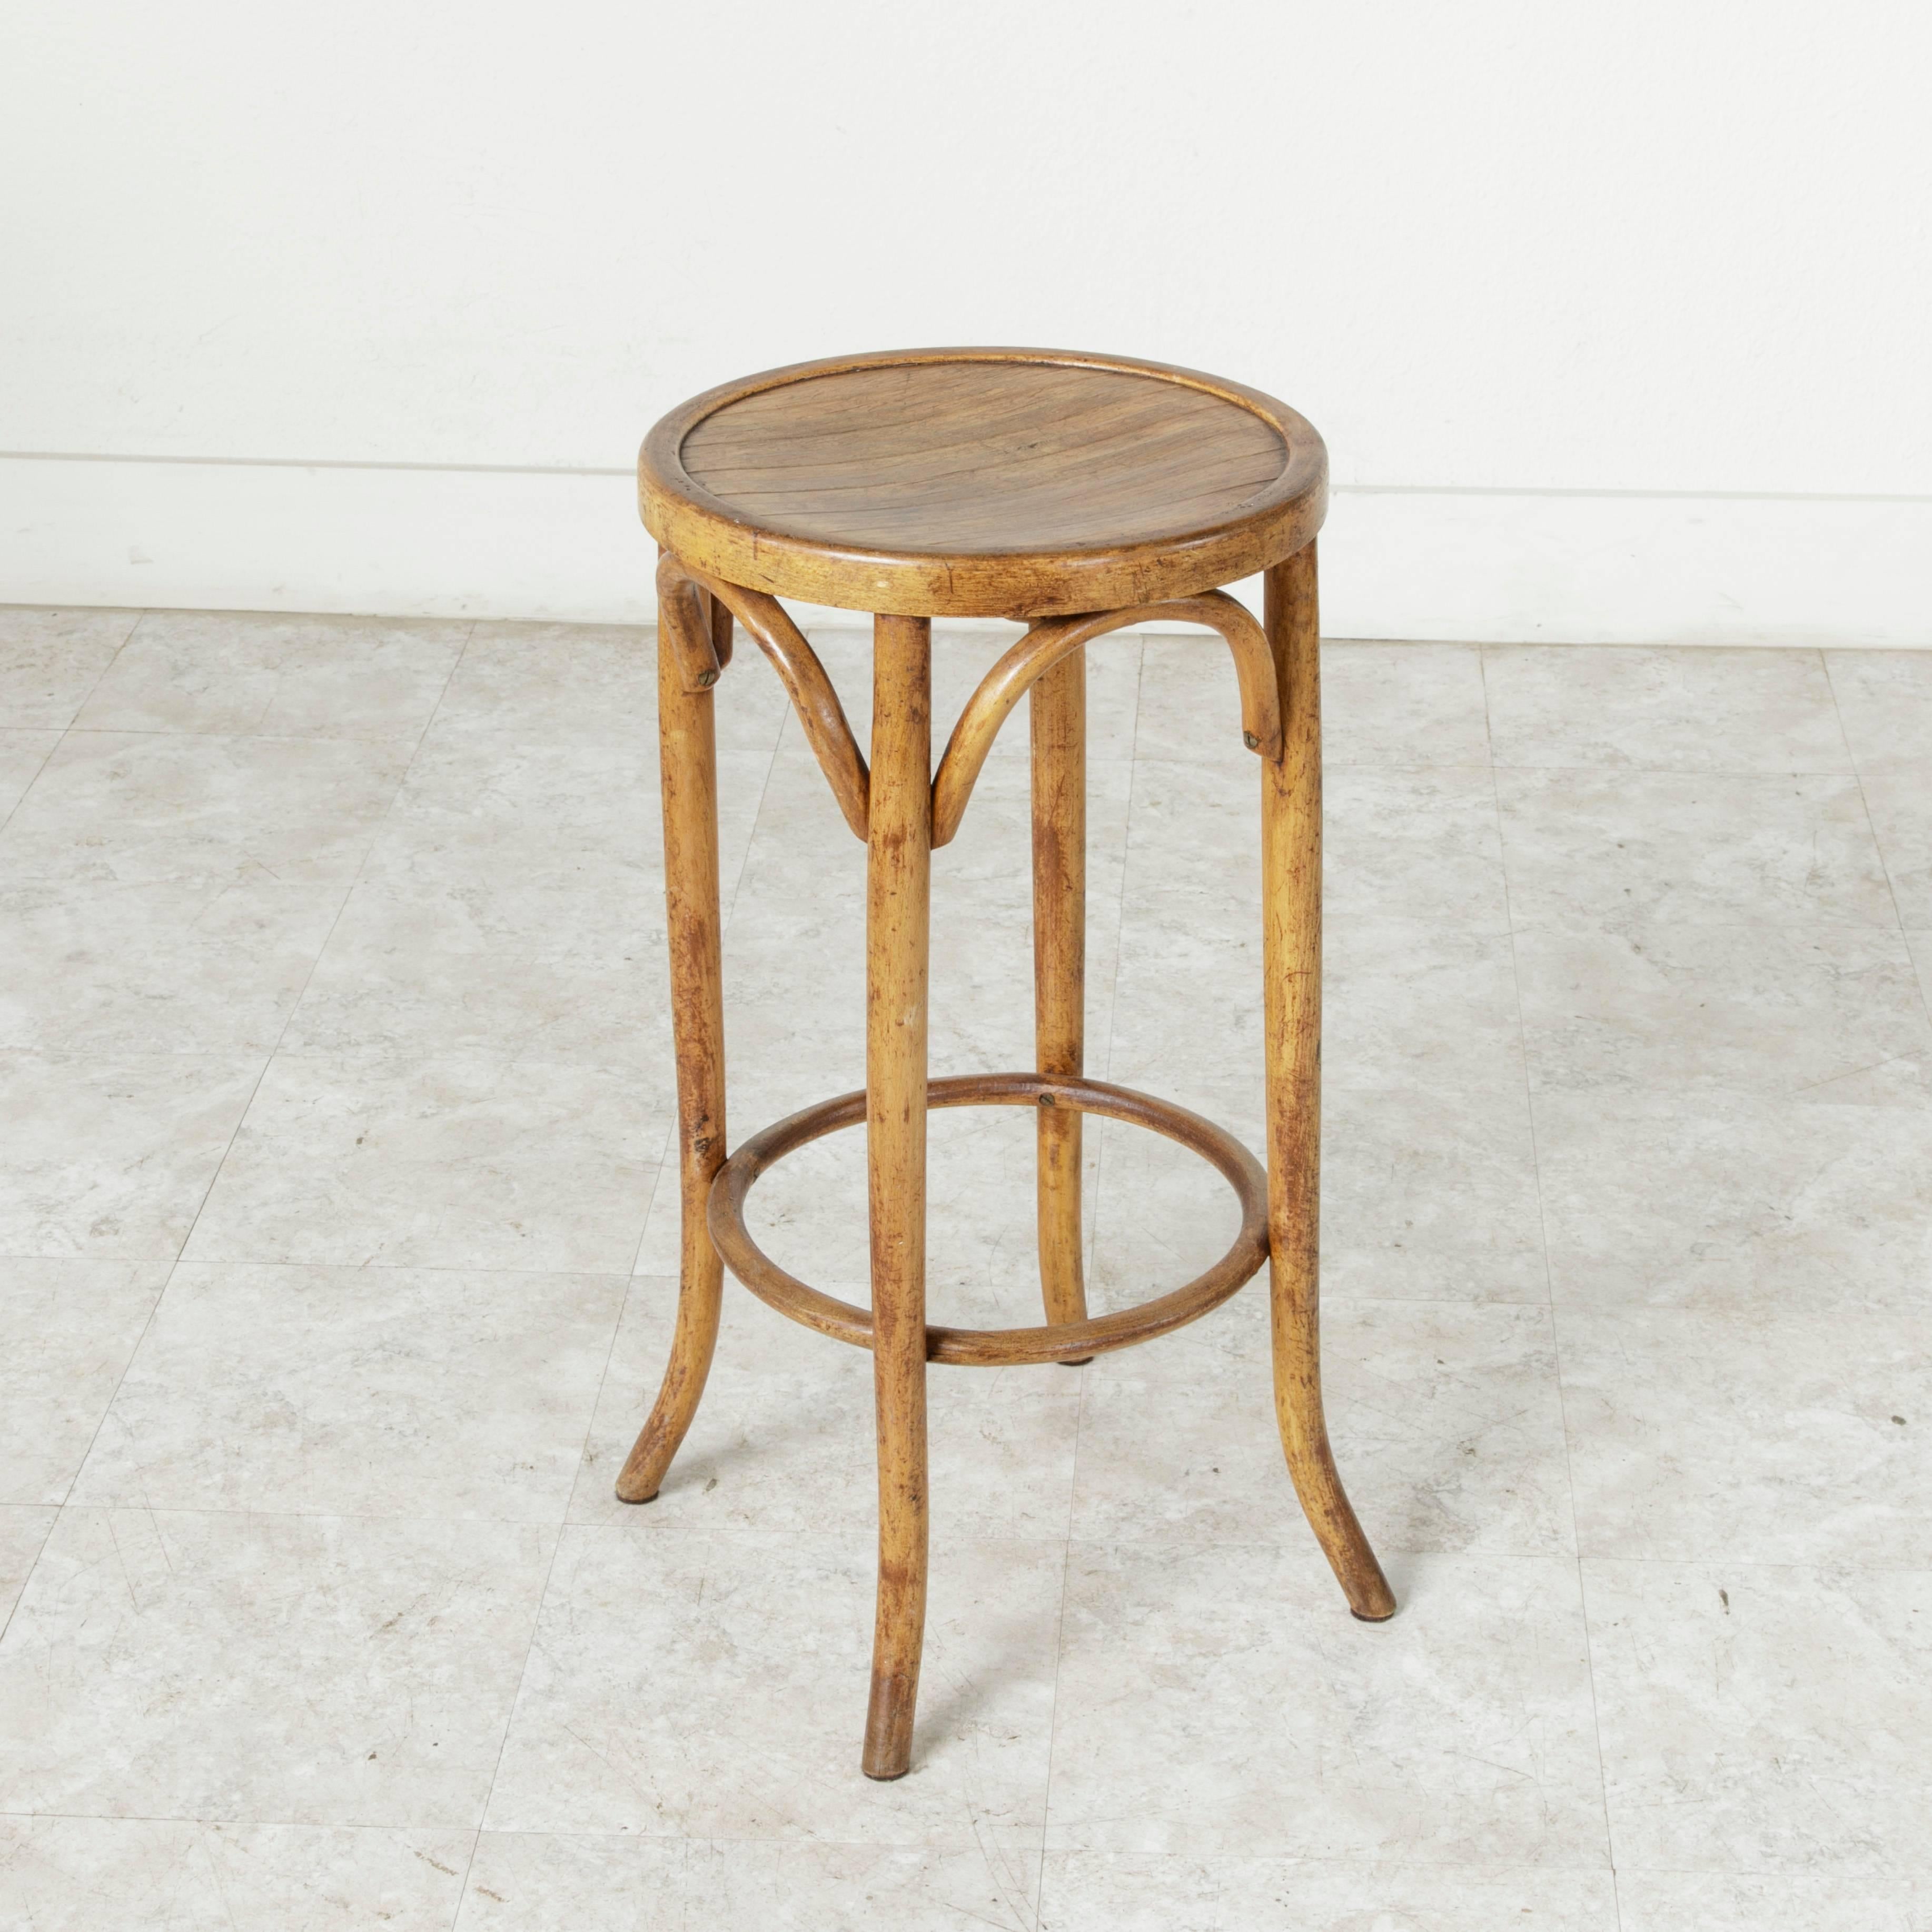 This early 20th century French bar stool in the Thonet style stands at counter height. Constructed of bentwood, this backless stool features a slatted seat and a circular stretcher at the bottom that acts as a footrest. Curved wood arches at the top